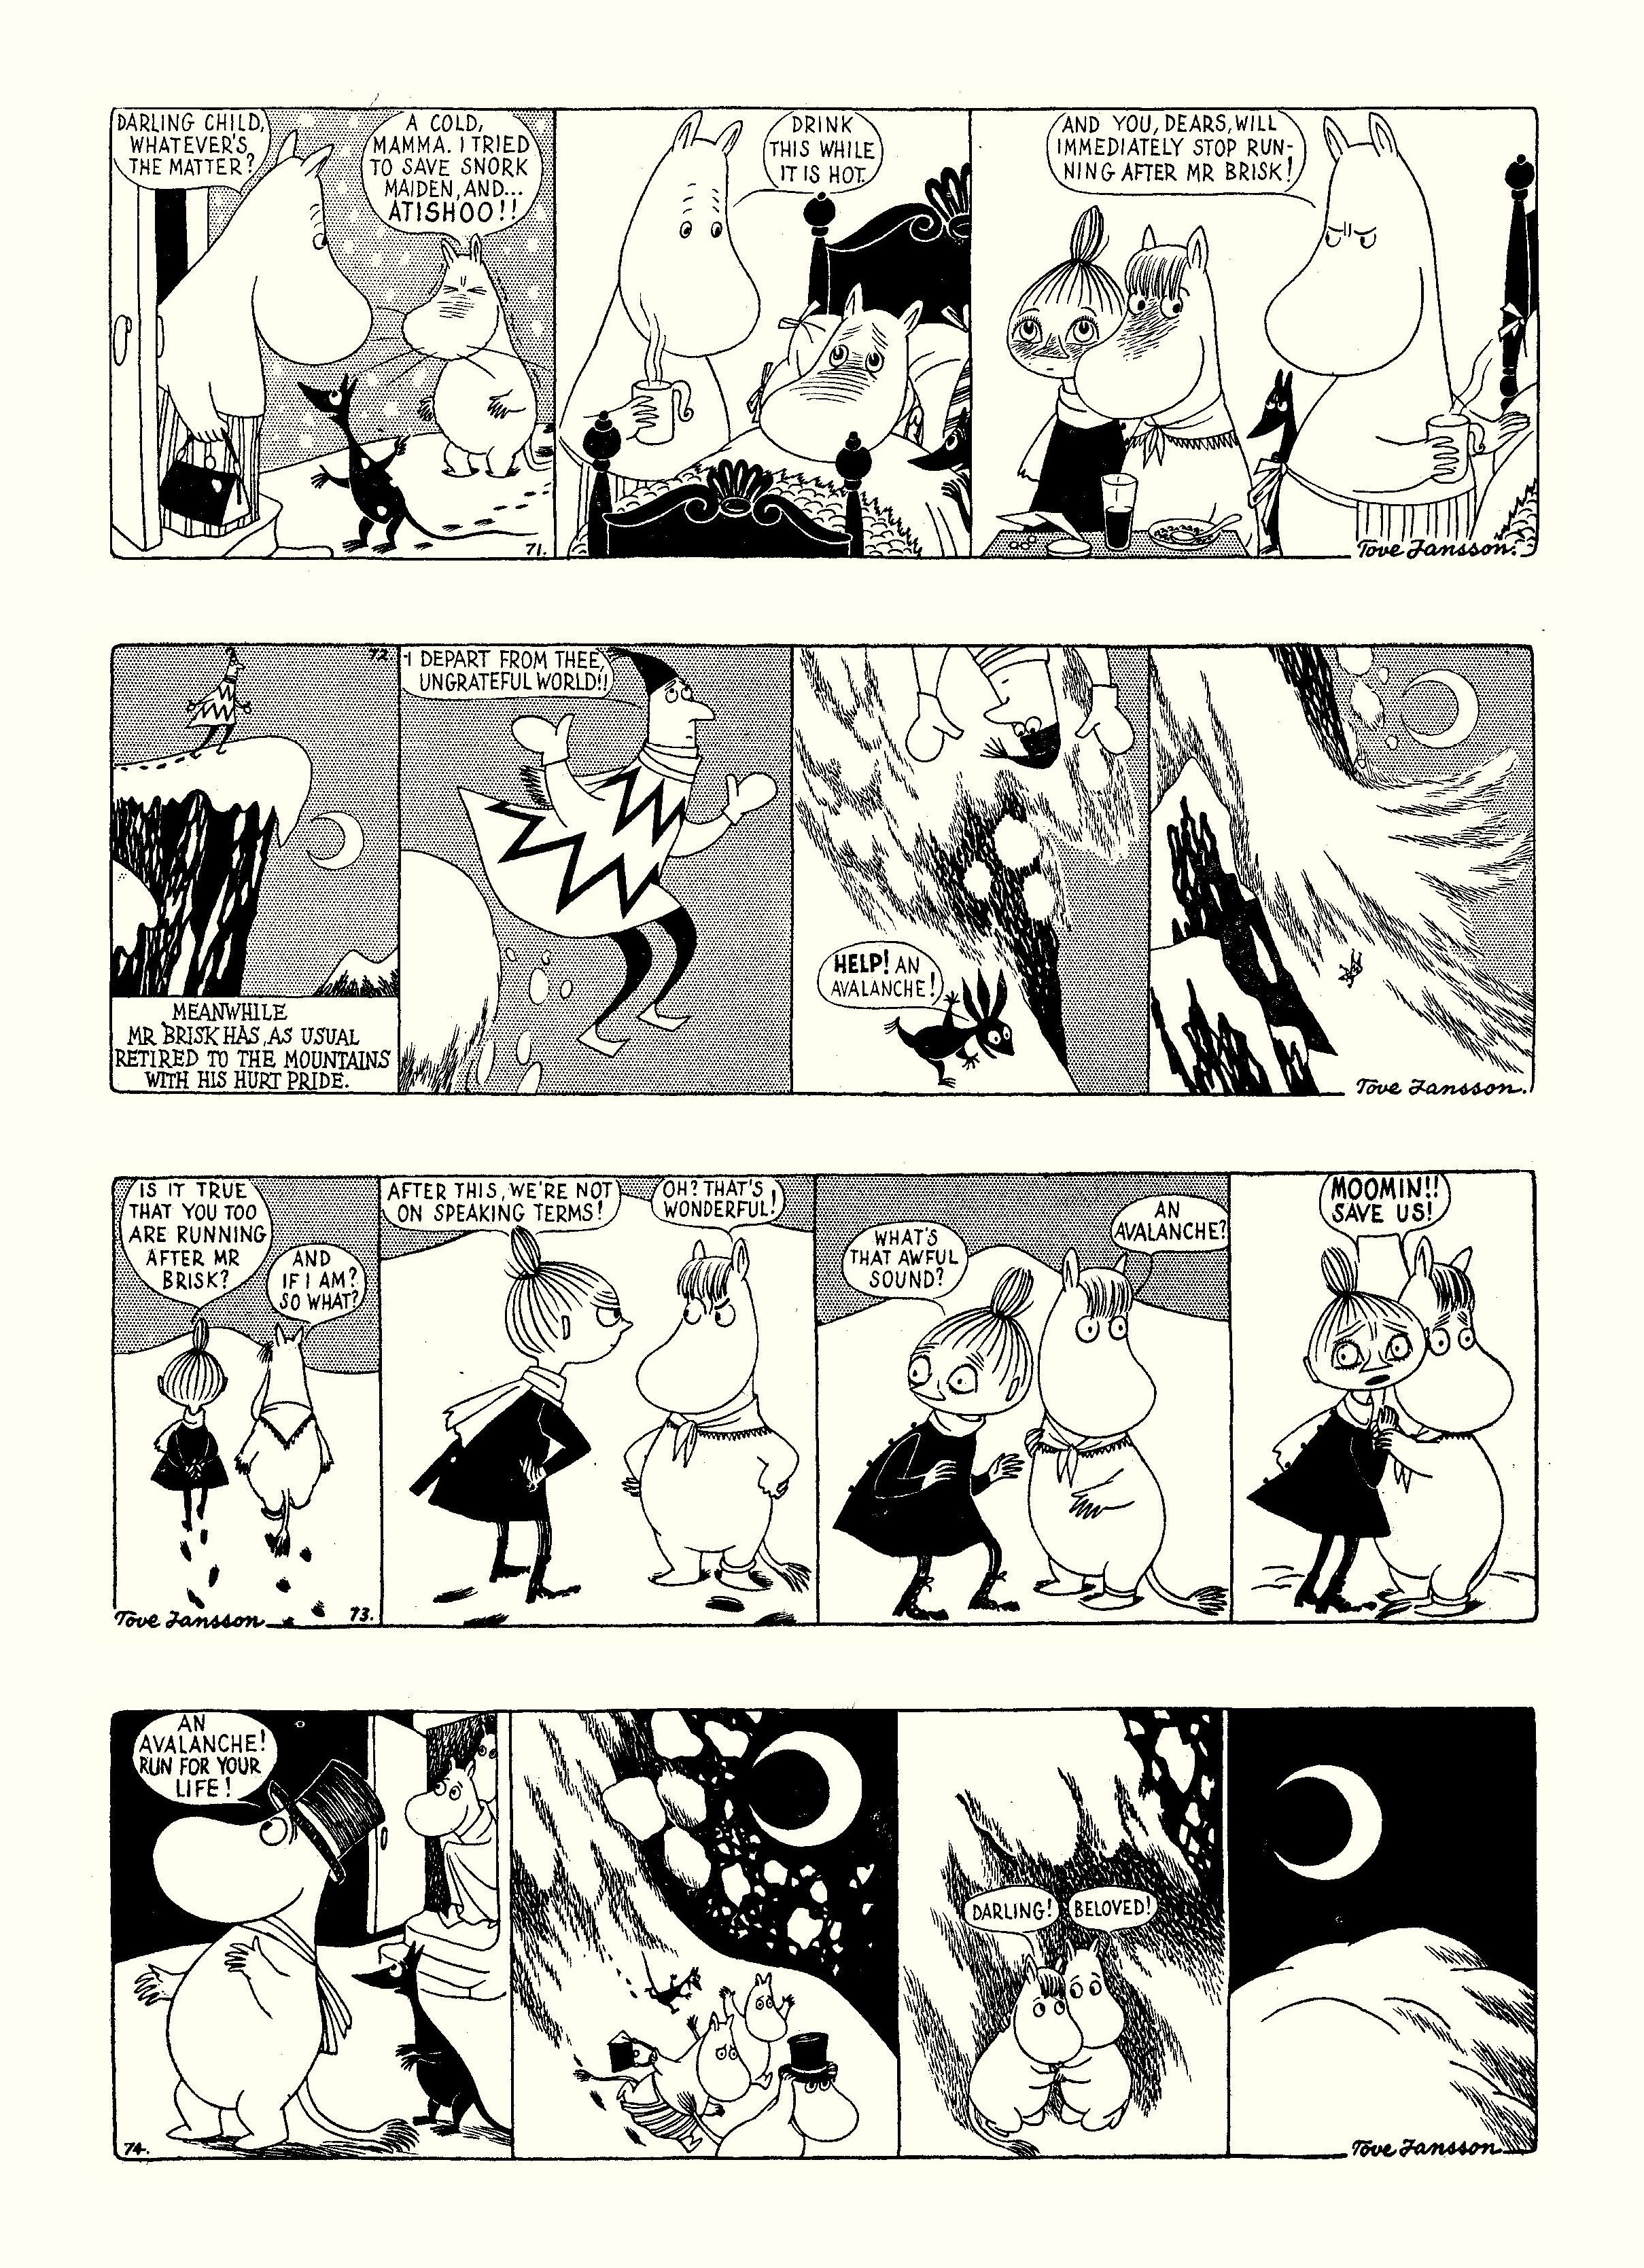 Read online Moomin: The Complete Tove Jansson Comic Strip comic -  Issue # TPB 2 - 24